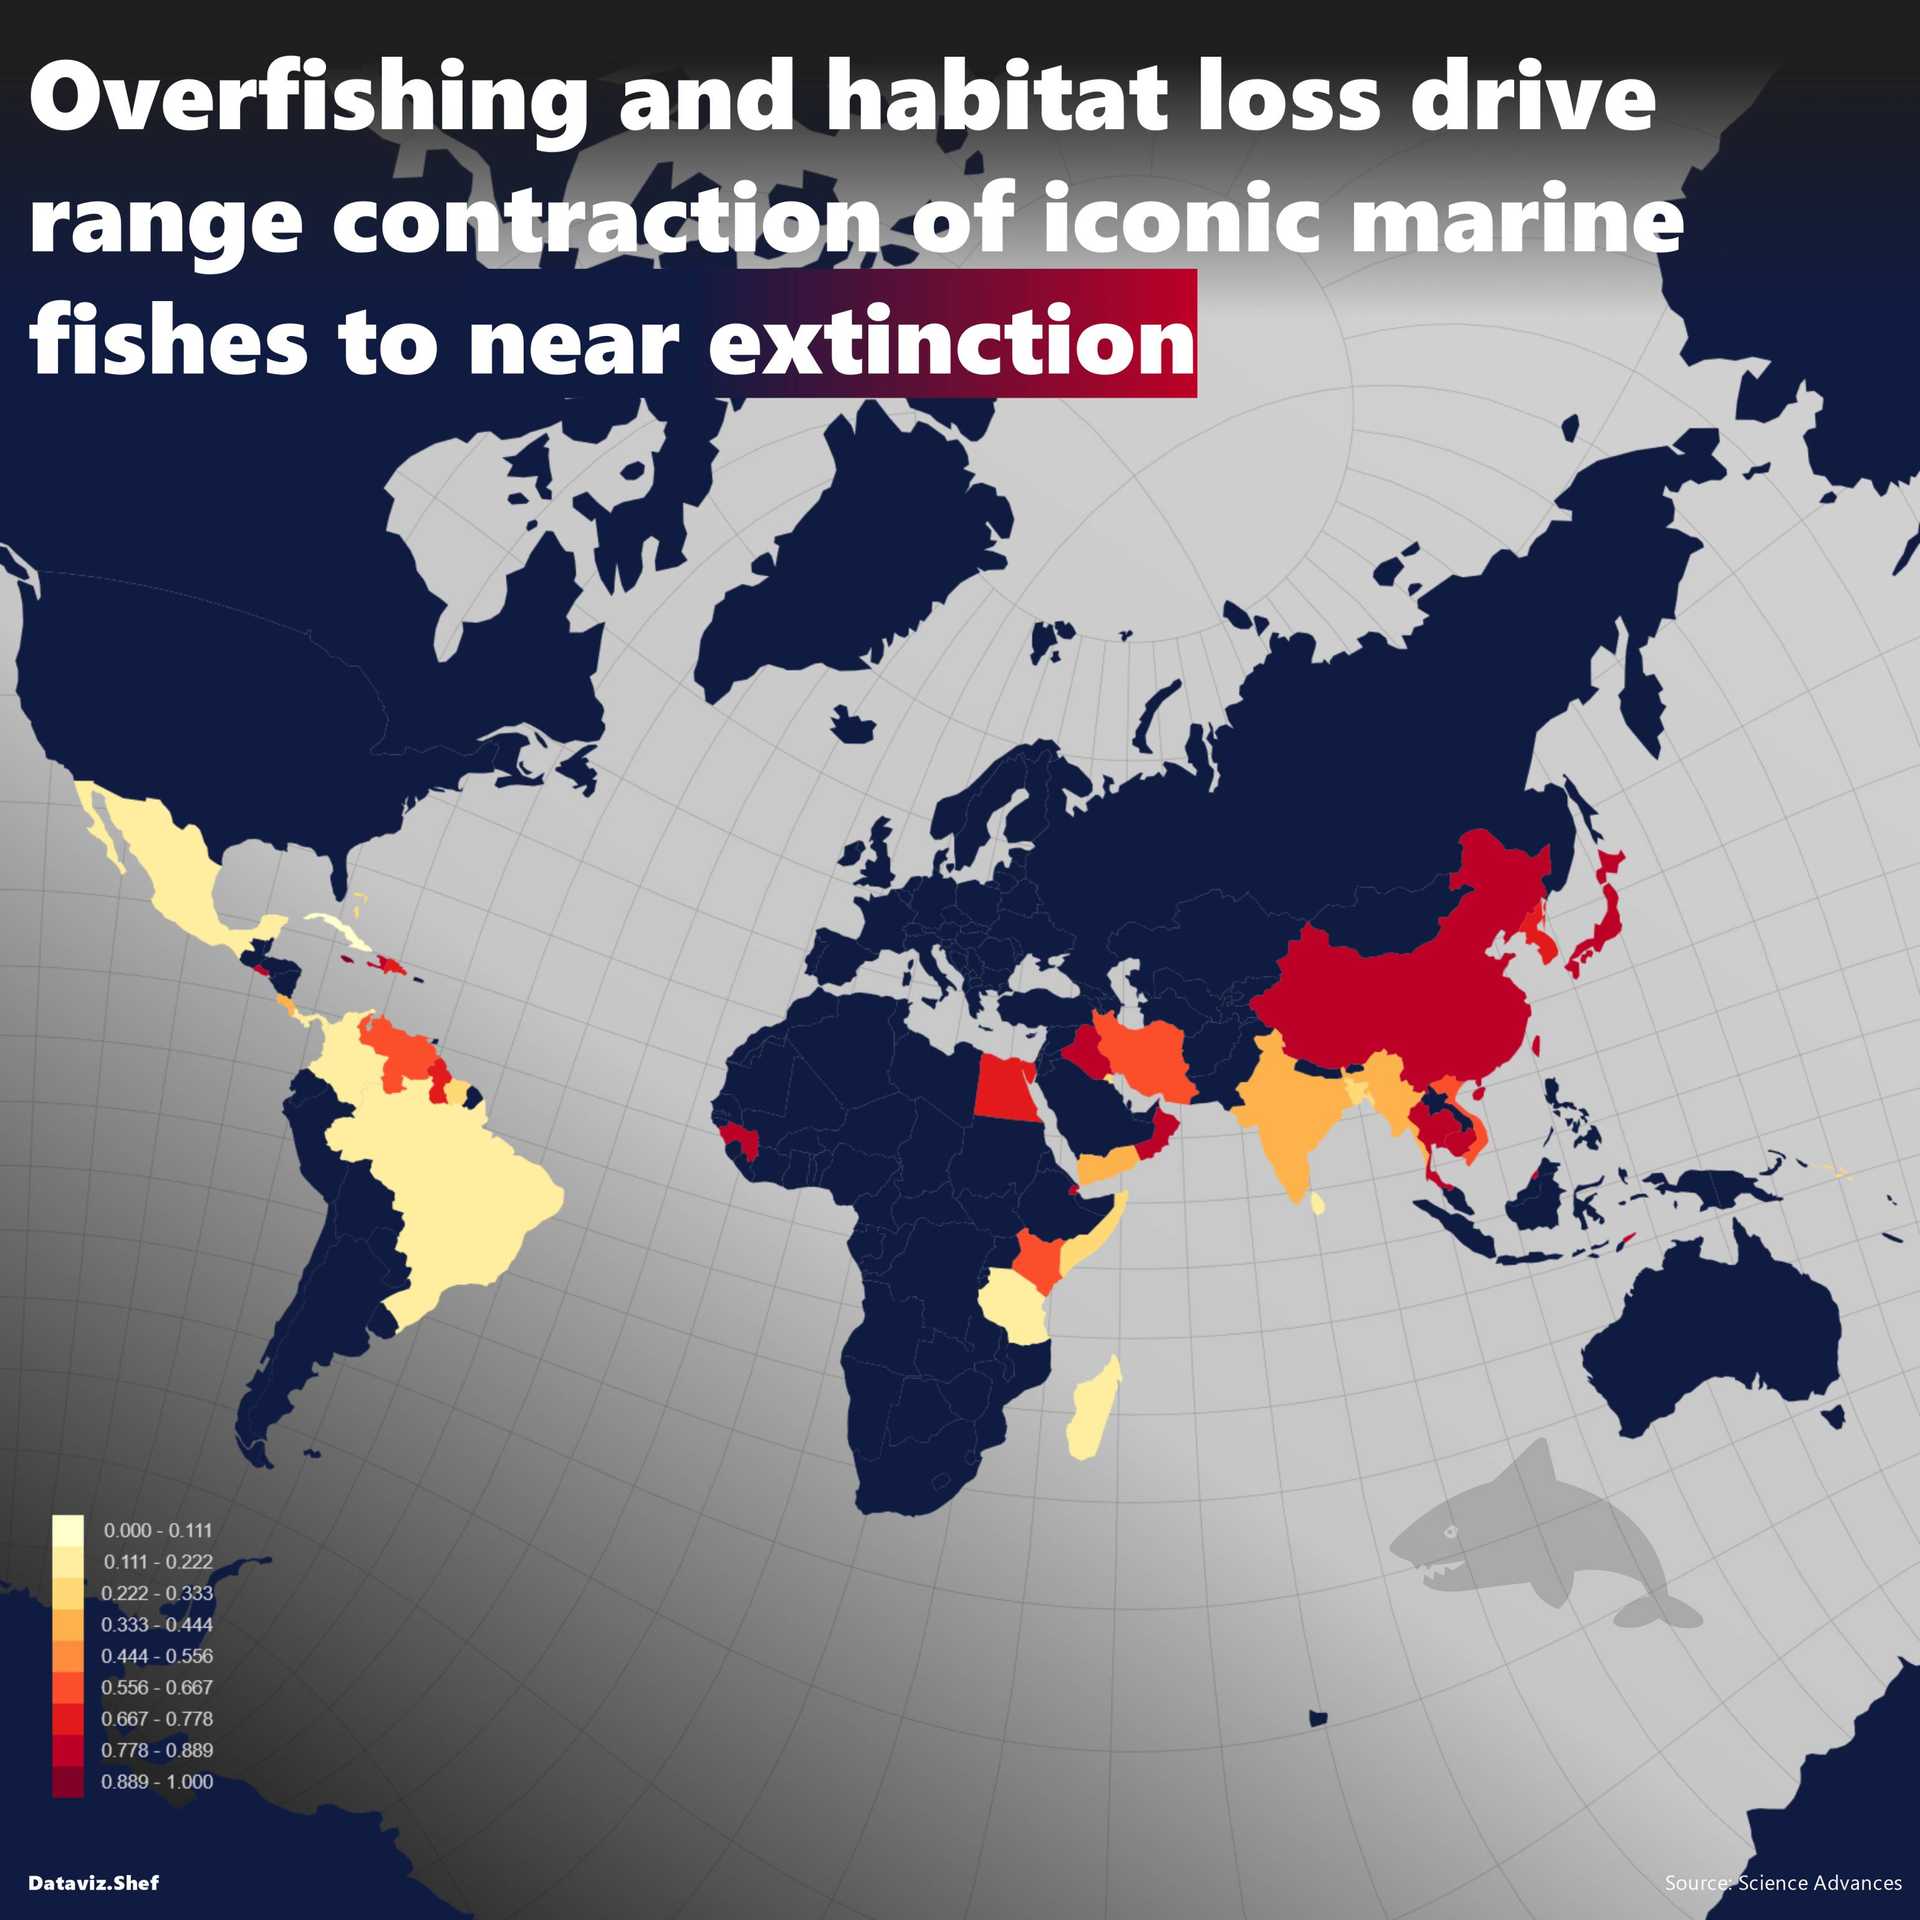 Visualisation: Overfishing and habitat loss drive range contraction of iconic marine fishes to near extinction